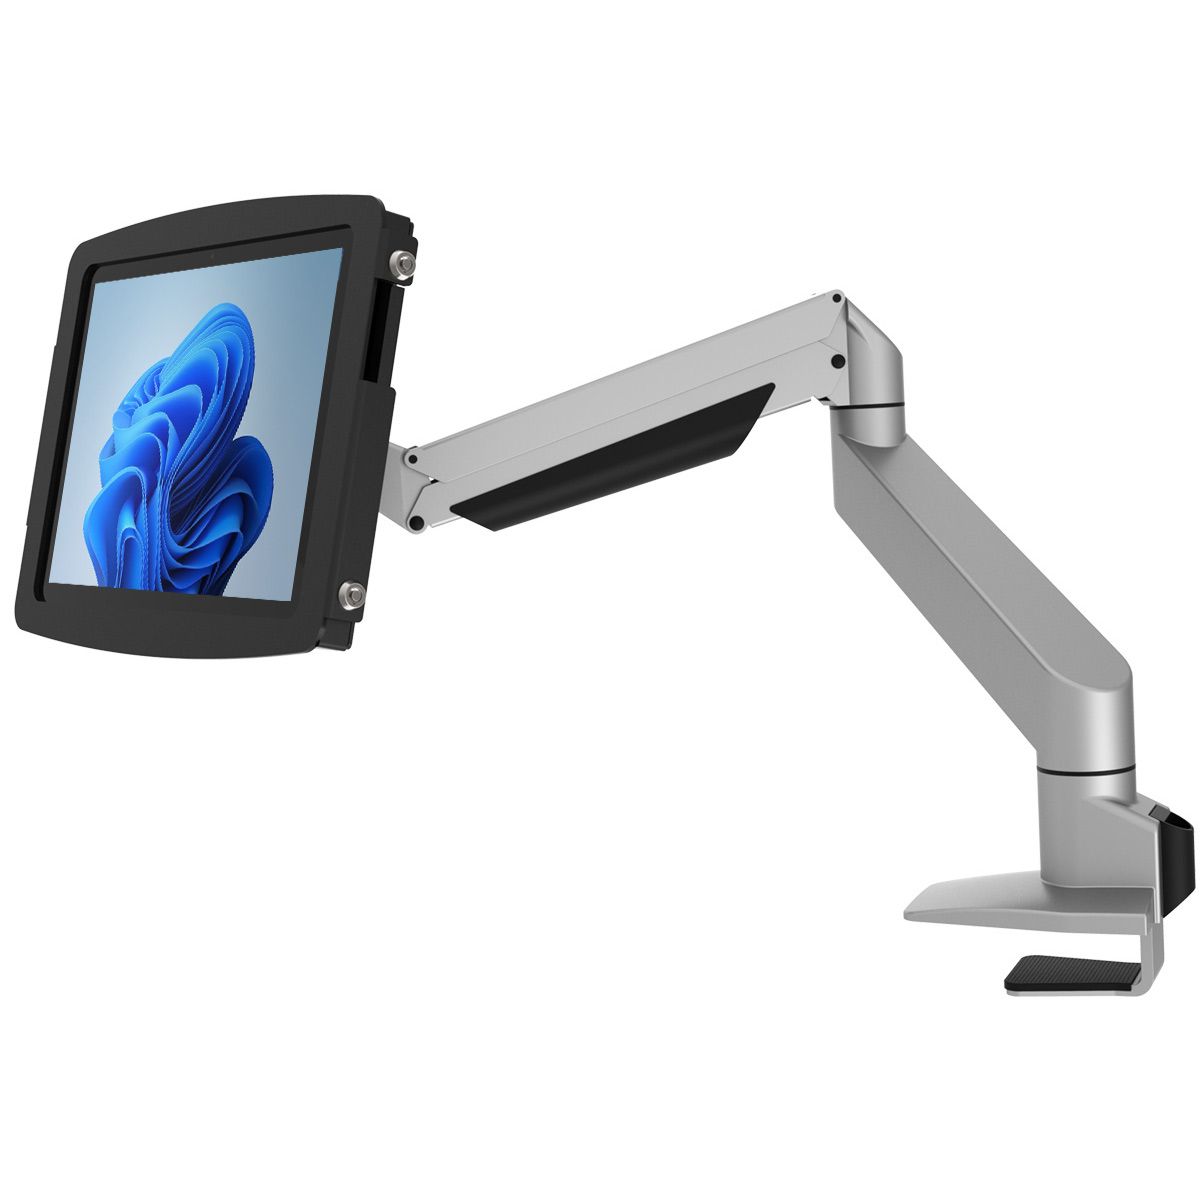 Surface Enclosure Articulating Arm Mount - Space Reach